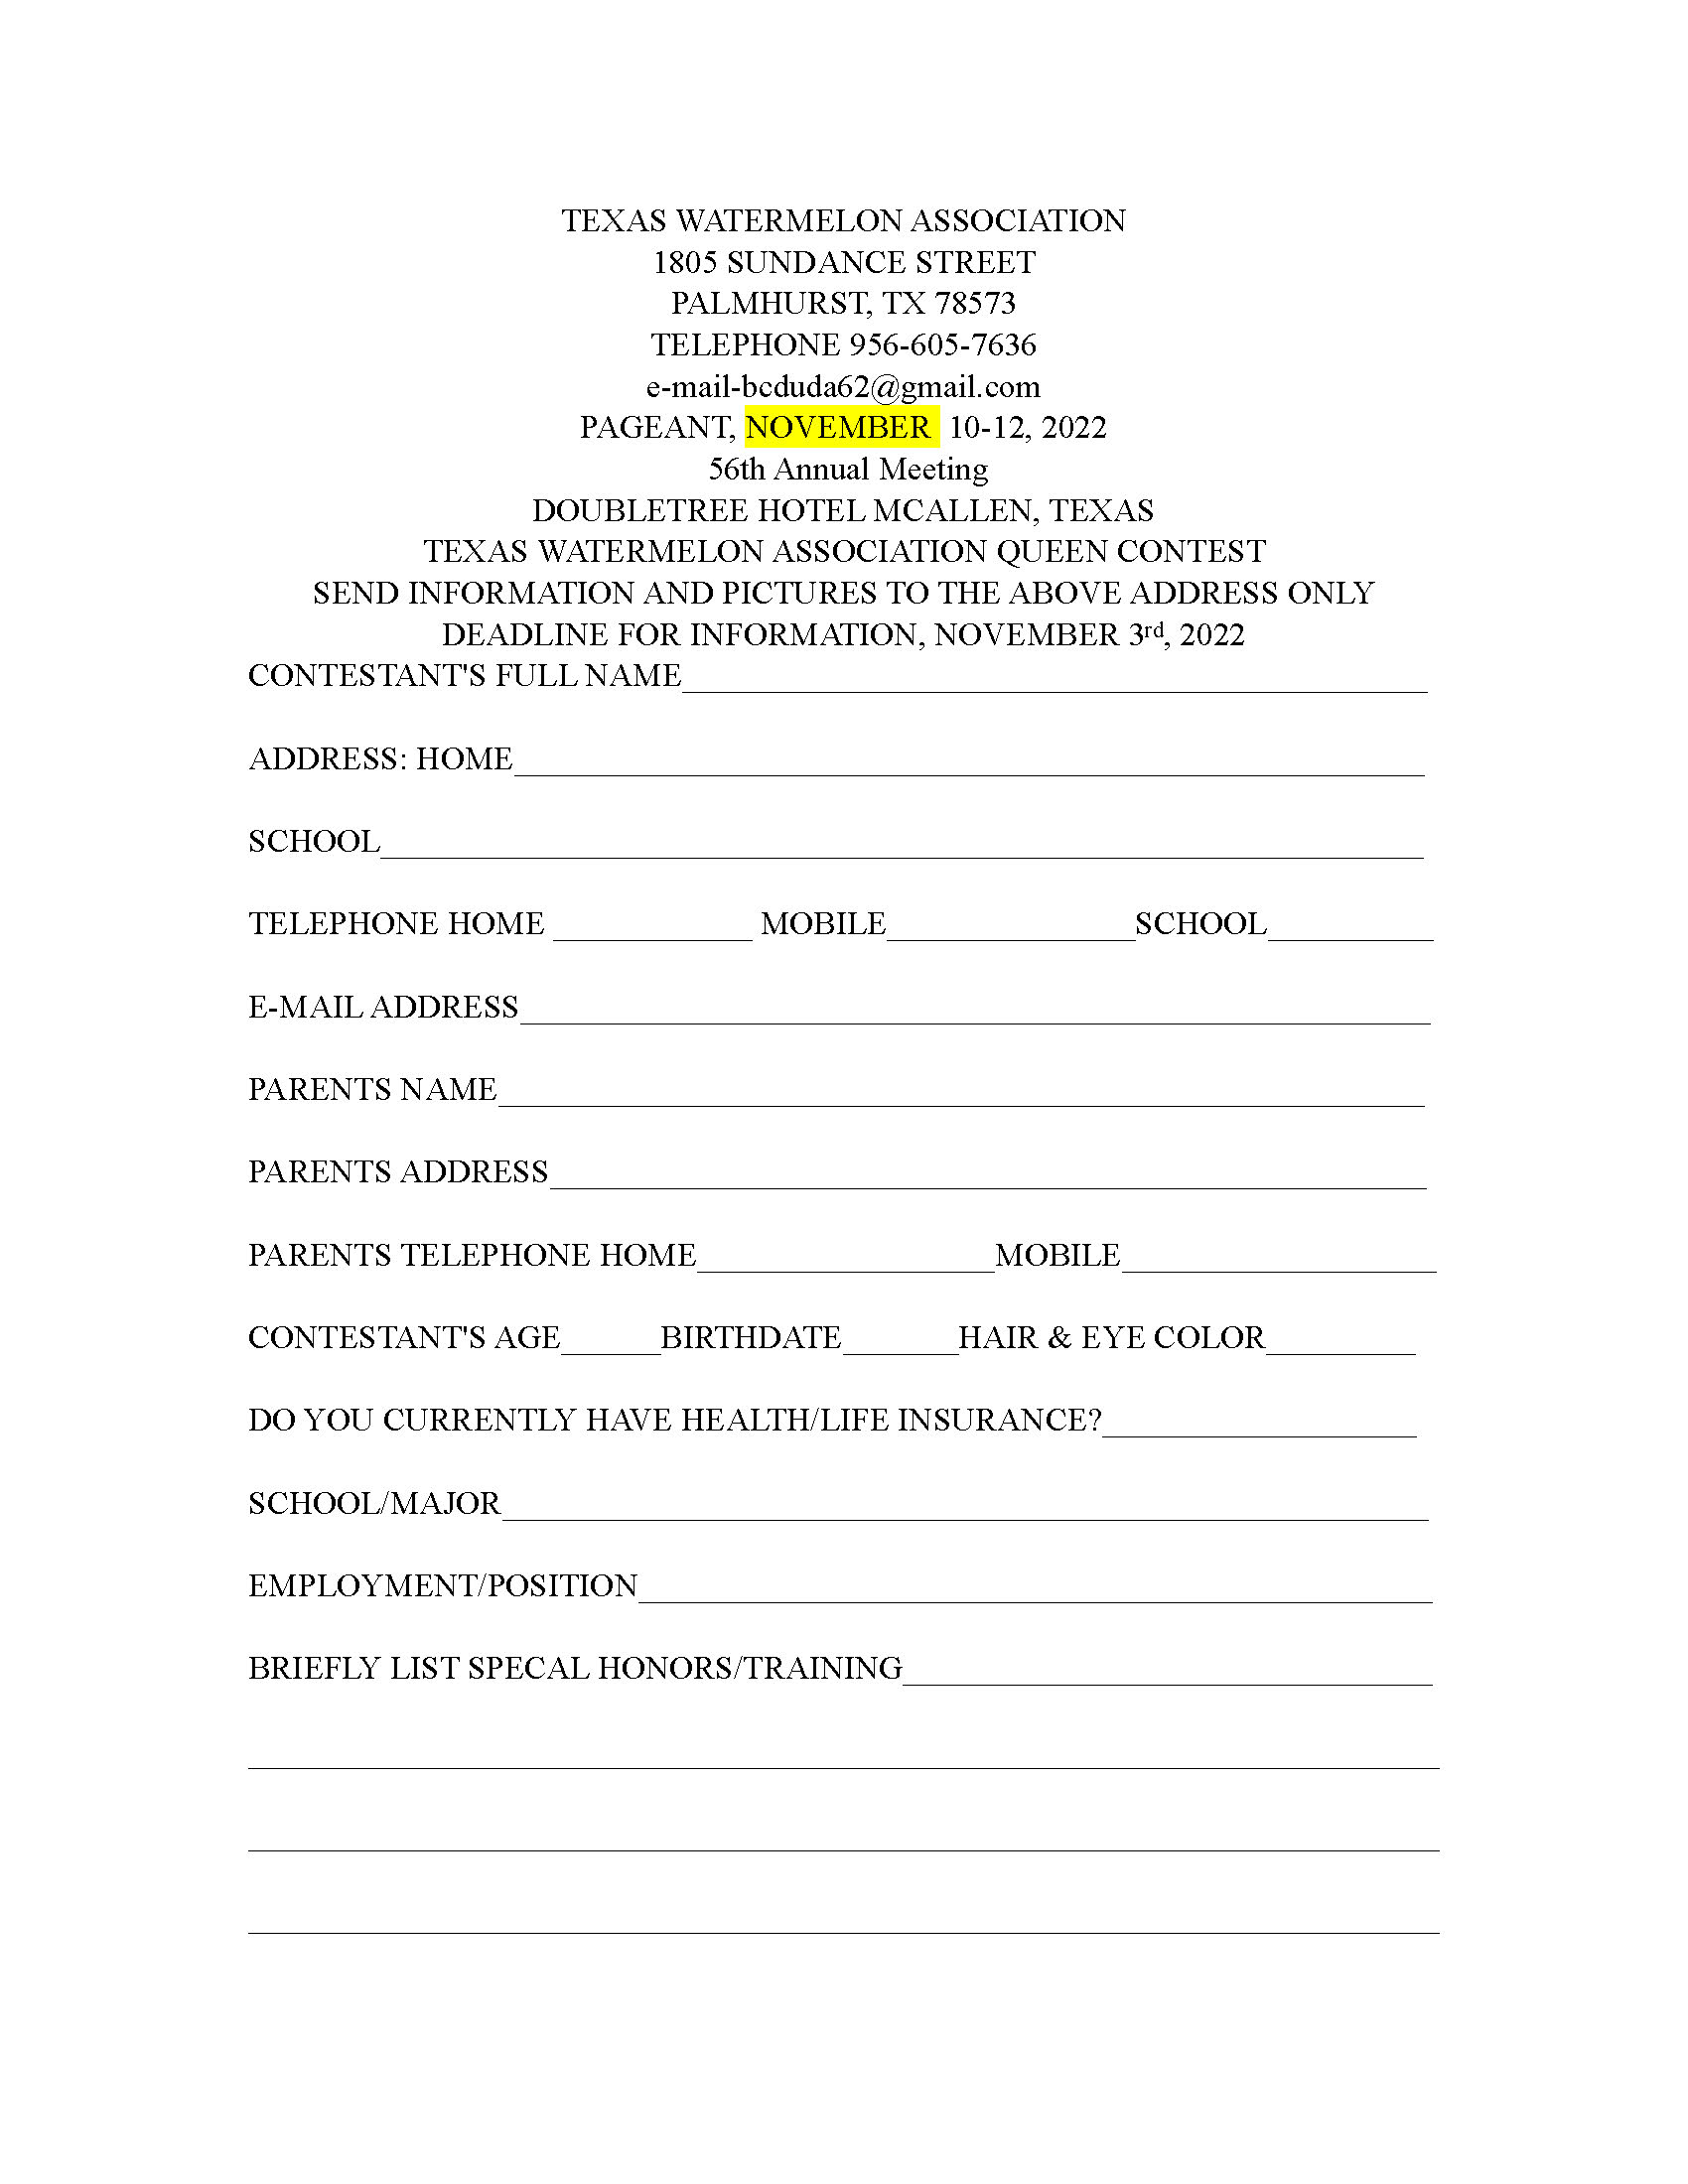 Queen Pageant Form PDF 2022 Fillable Page 1